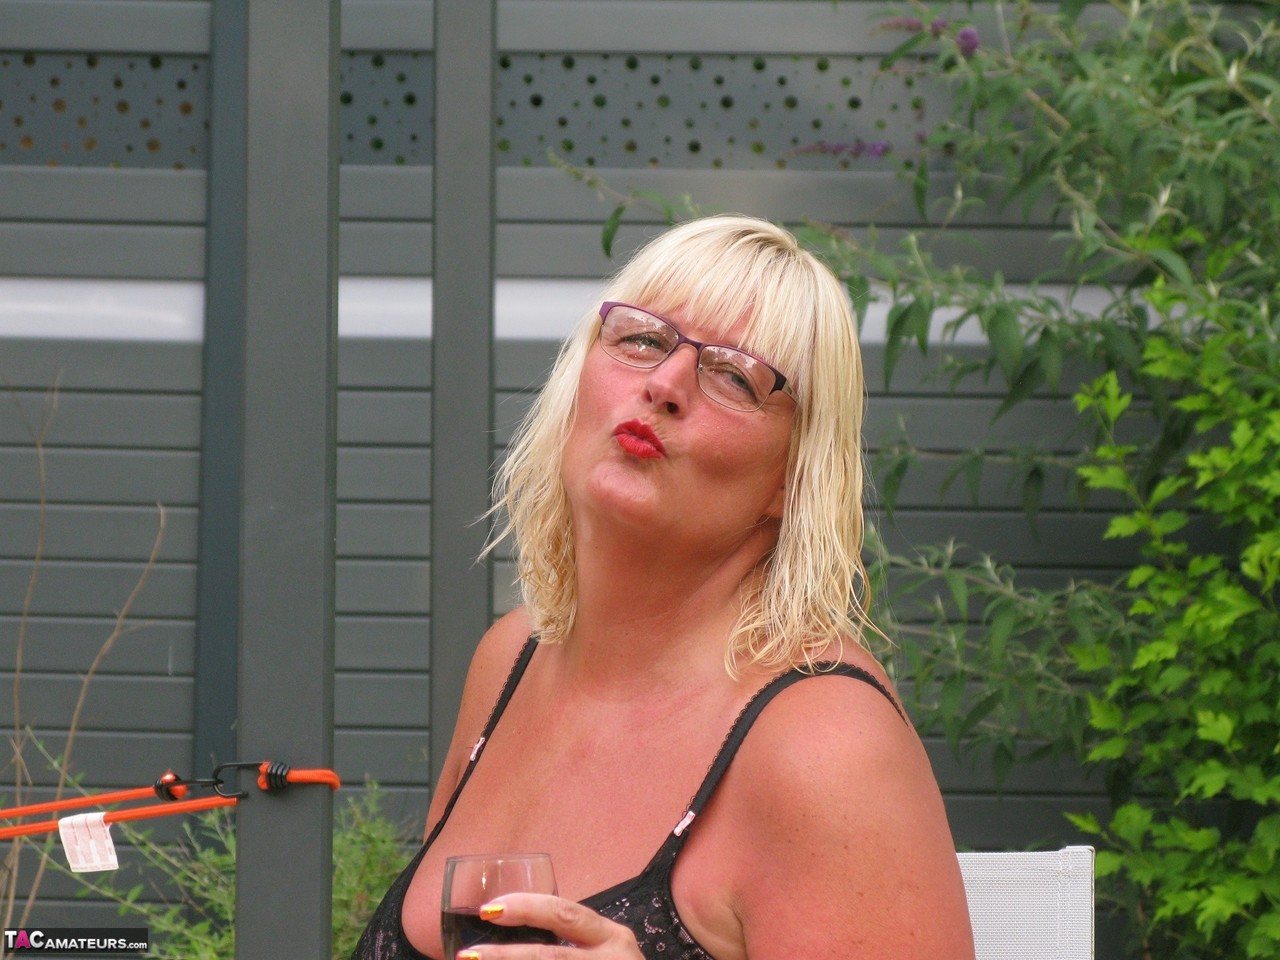 Older blonde BBW Chrissy Uk gives a BJ after going topless in a garden setting foto porno #428341424